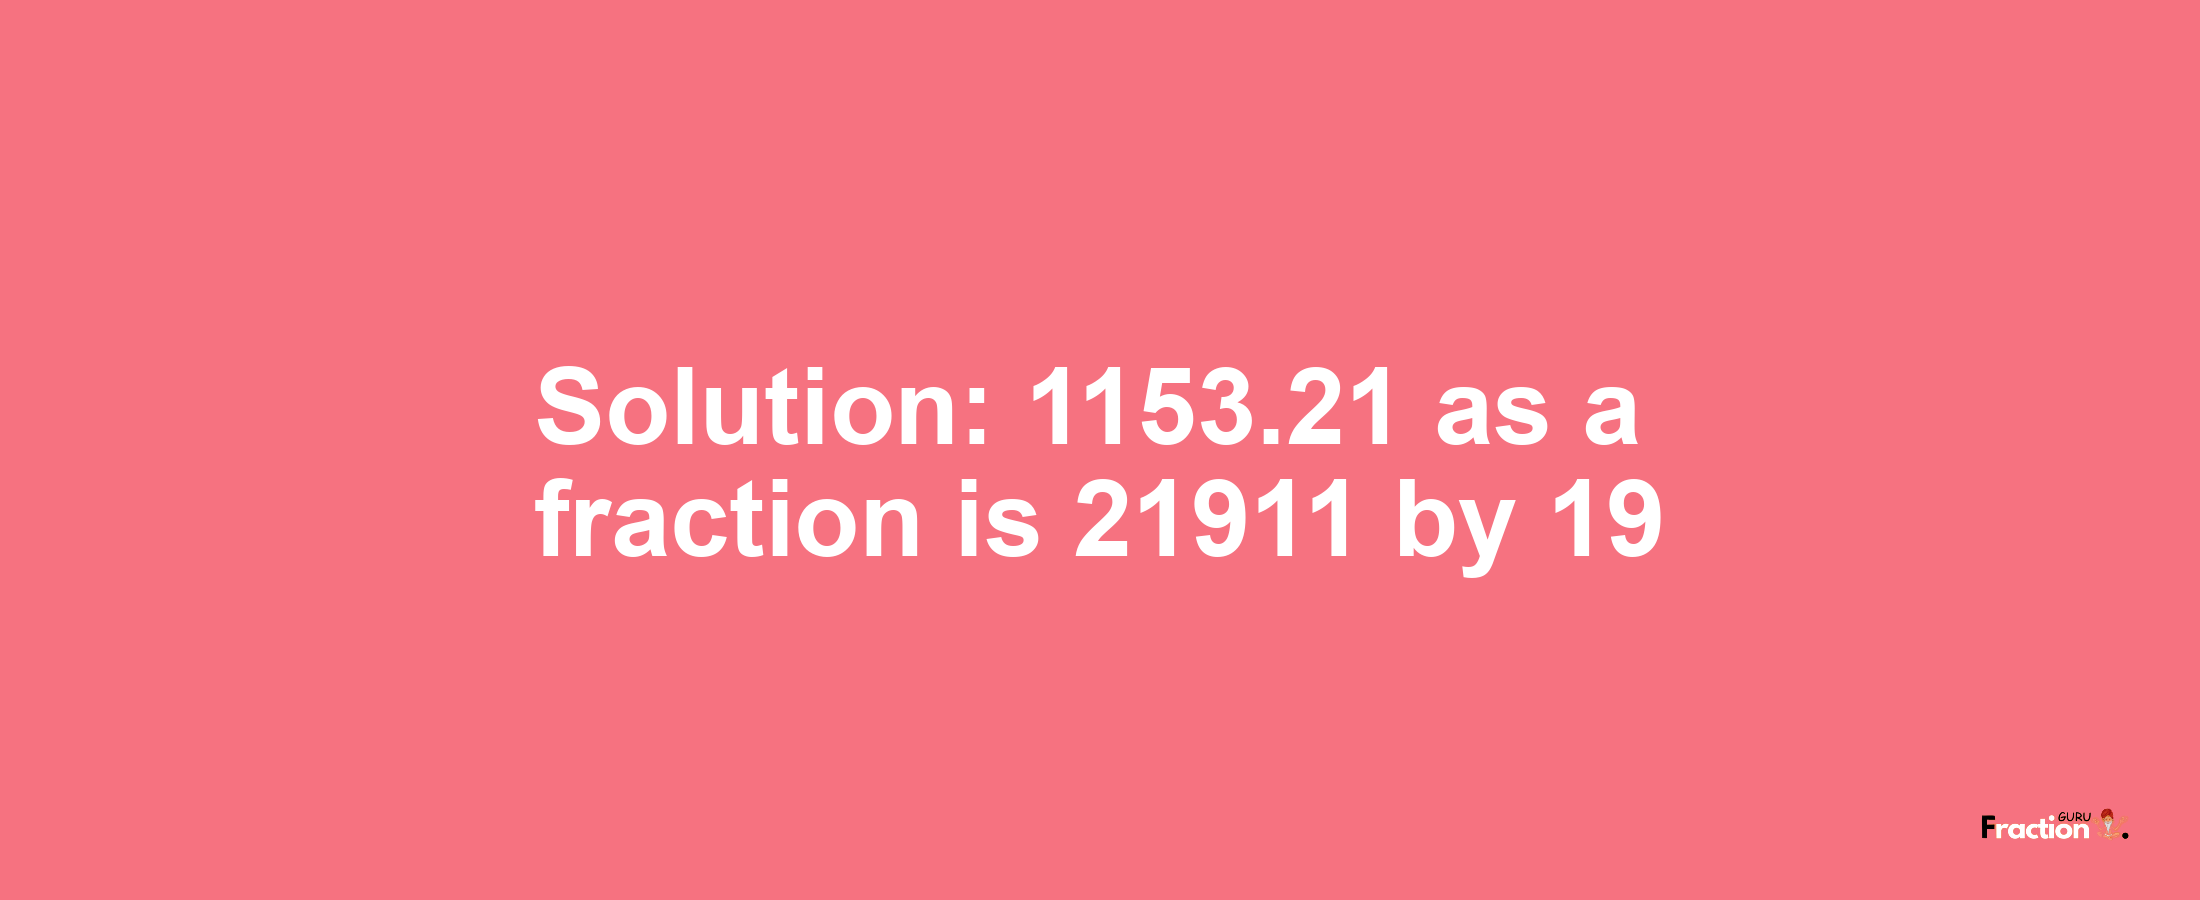 Solution:1153.21 as a fraction is 21911/19